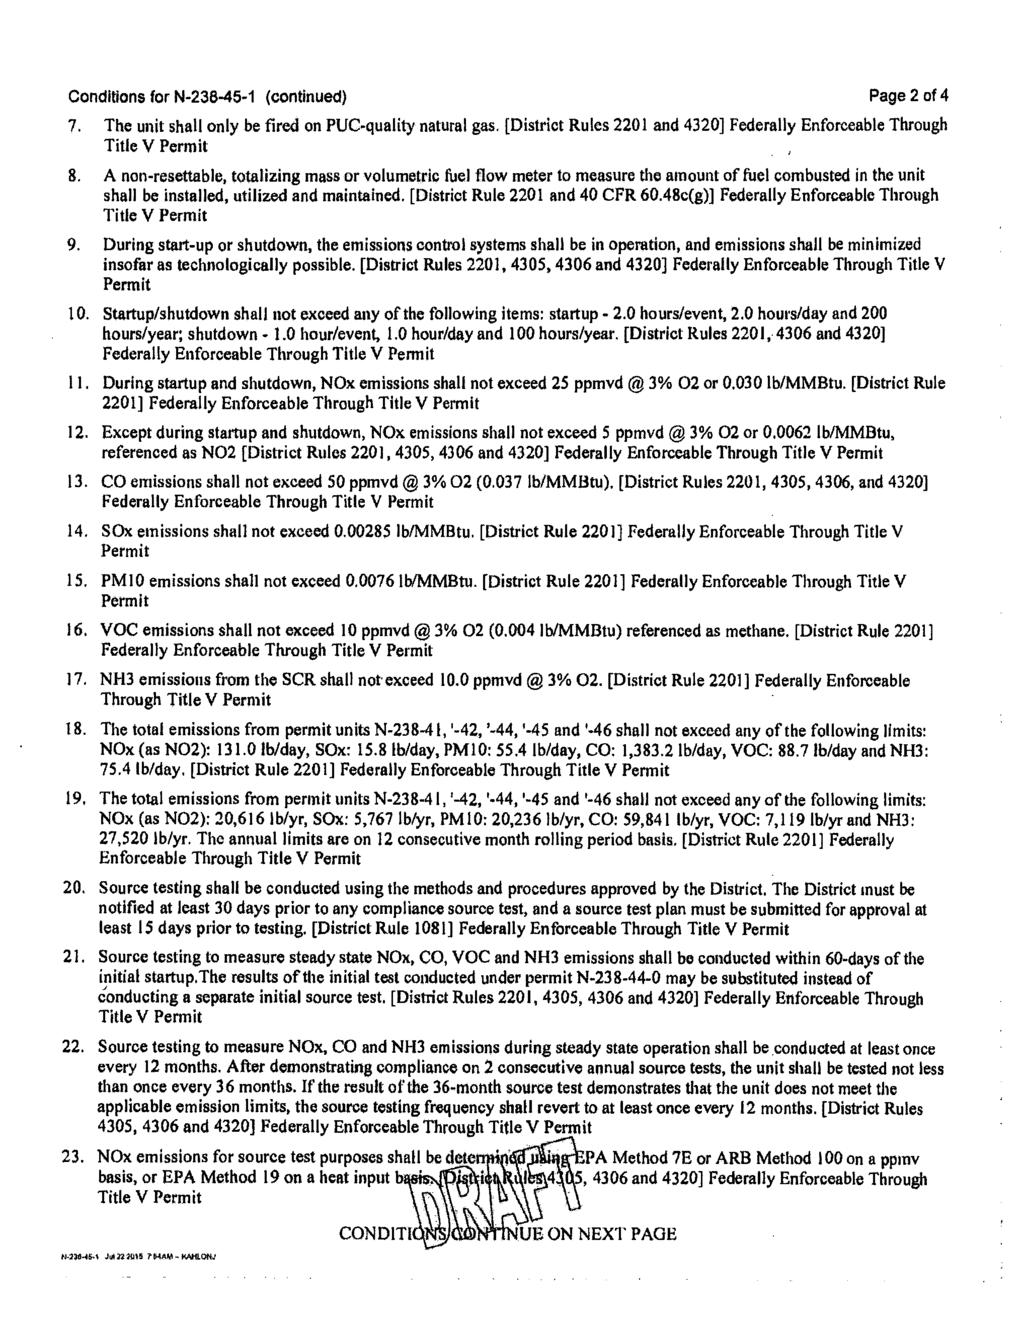 Conditions for N-236-45-1 (continued) Page 2 of 4 7. The unit shall only be fired on PUC-quality natural gas. [District Rules 2201 and 4320] Federally Enforceable Through Title V Permit 8.